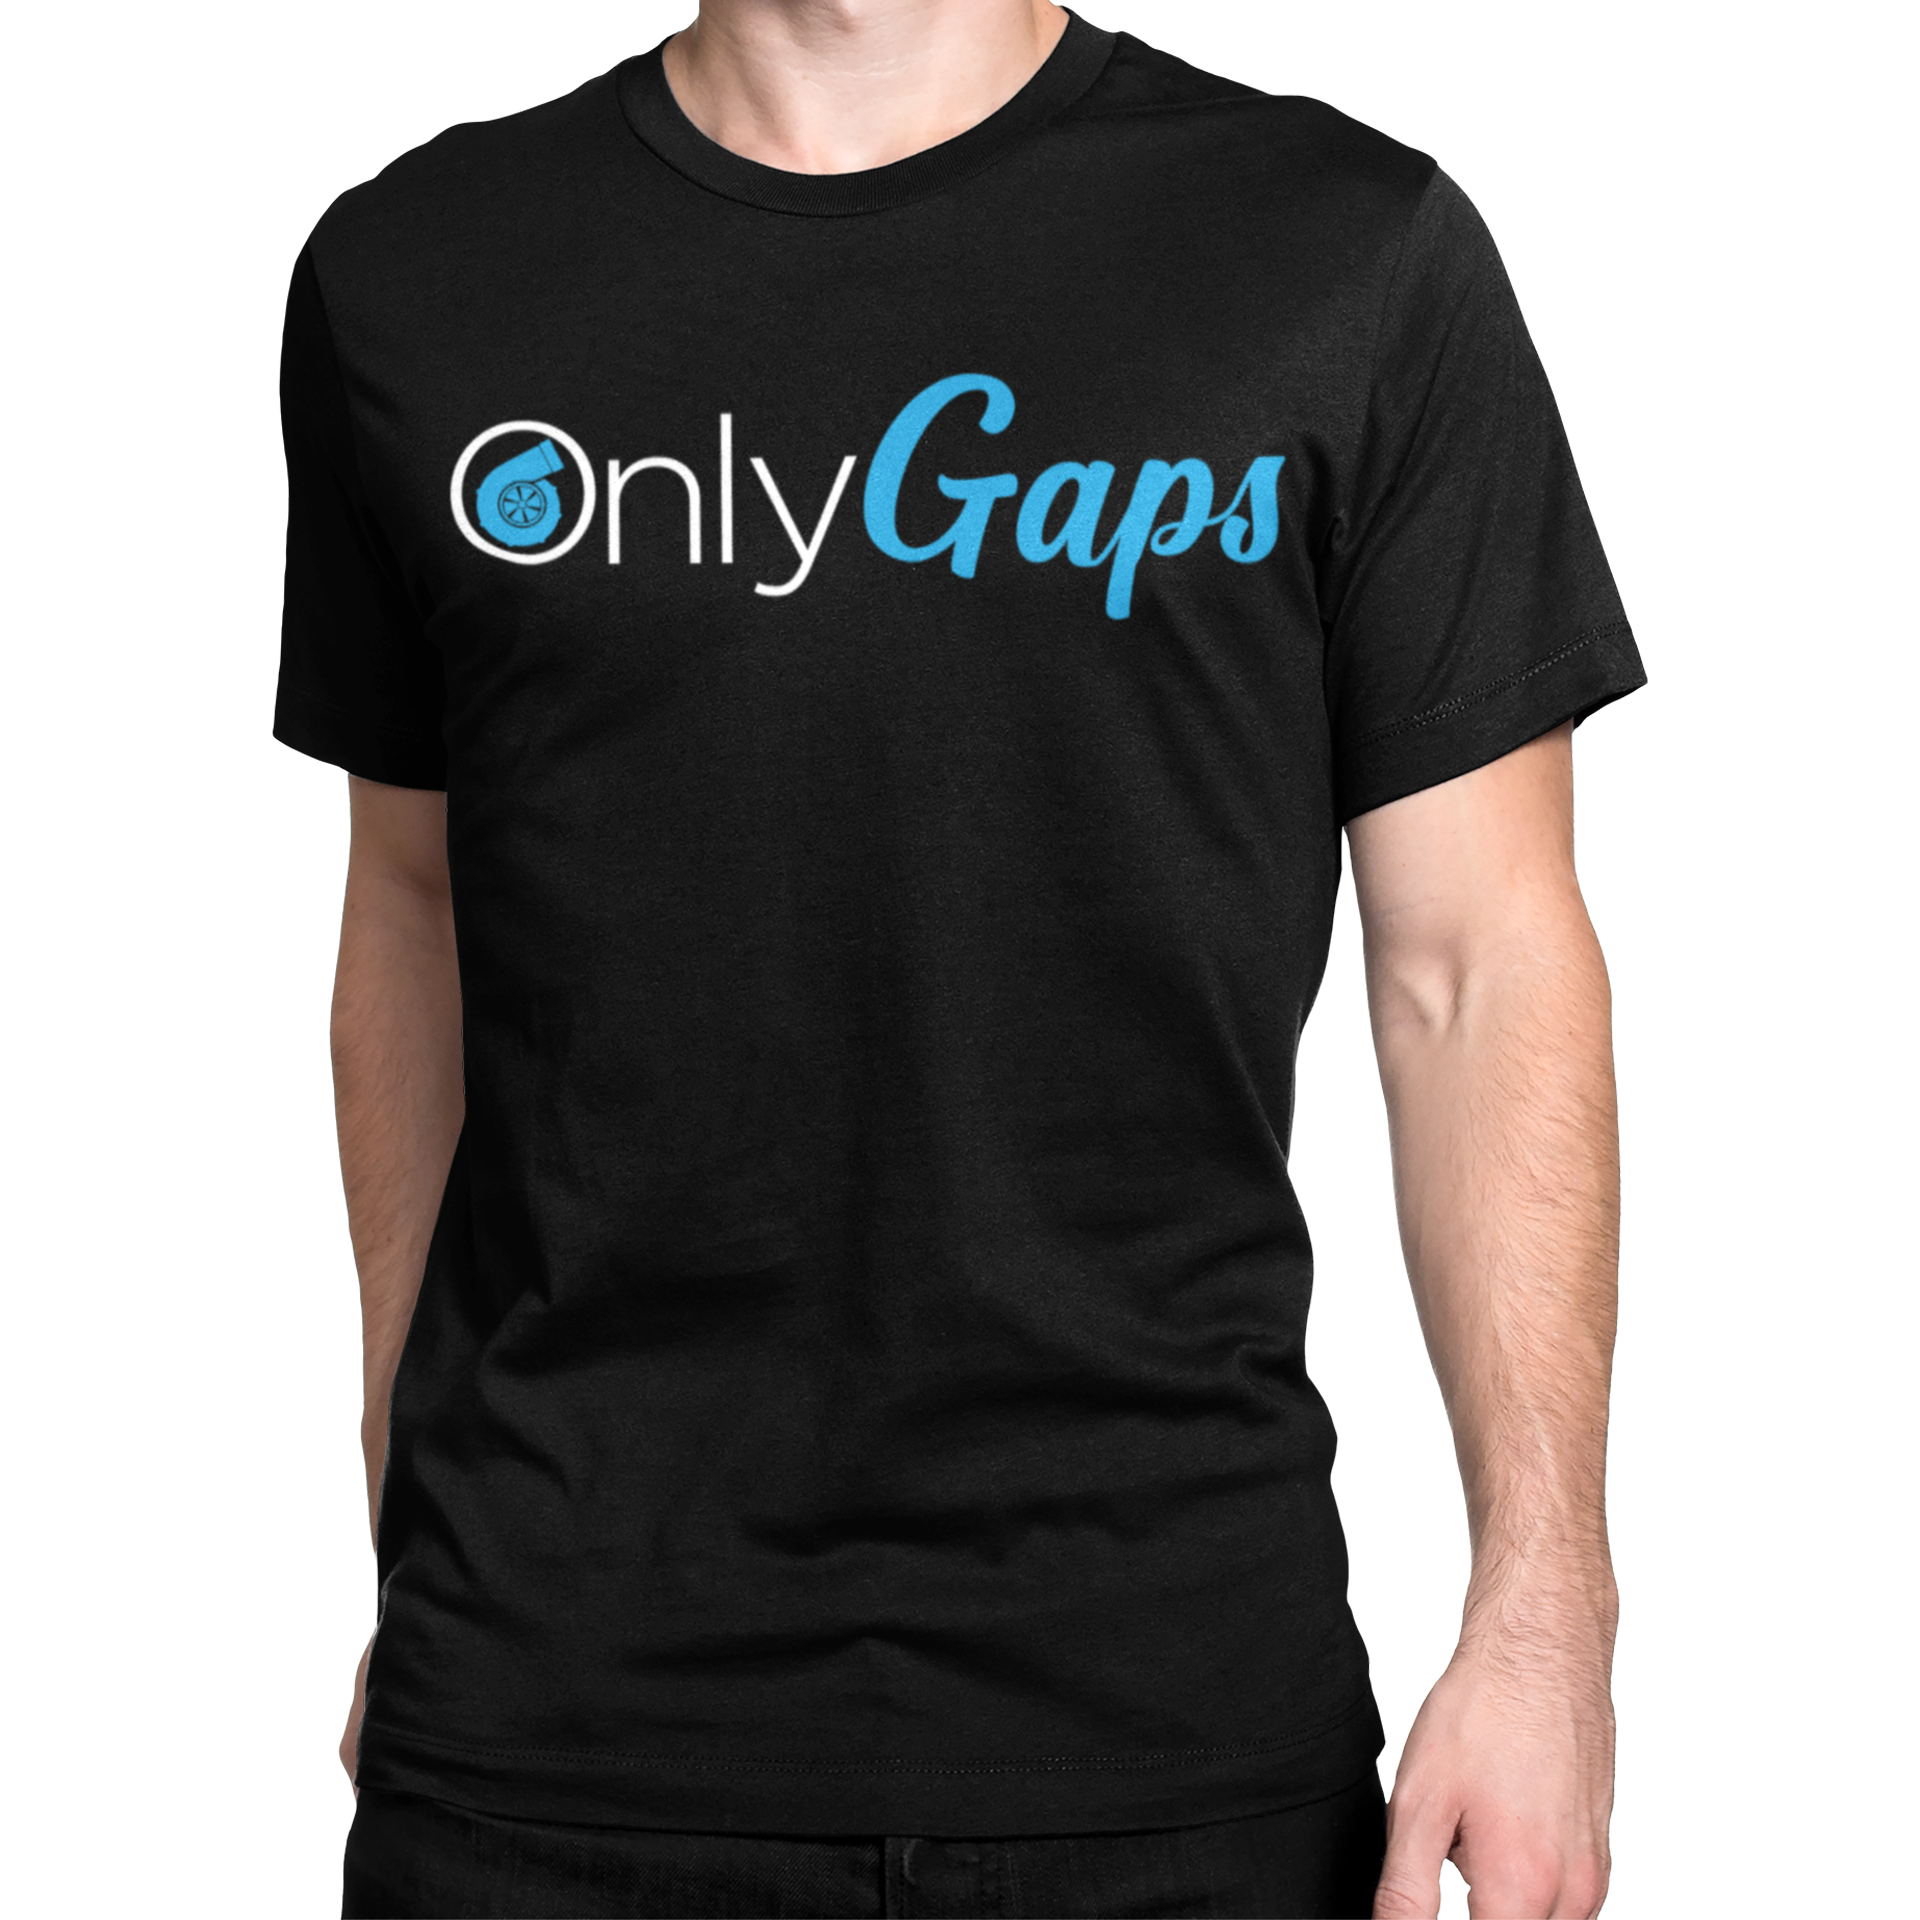 ONLY GAPS – Styln Industries